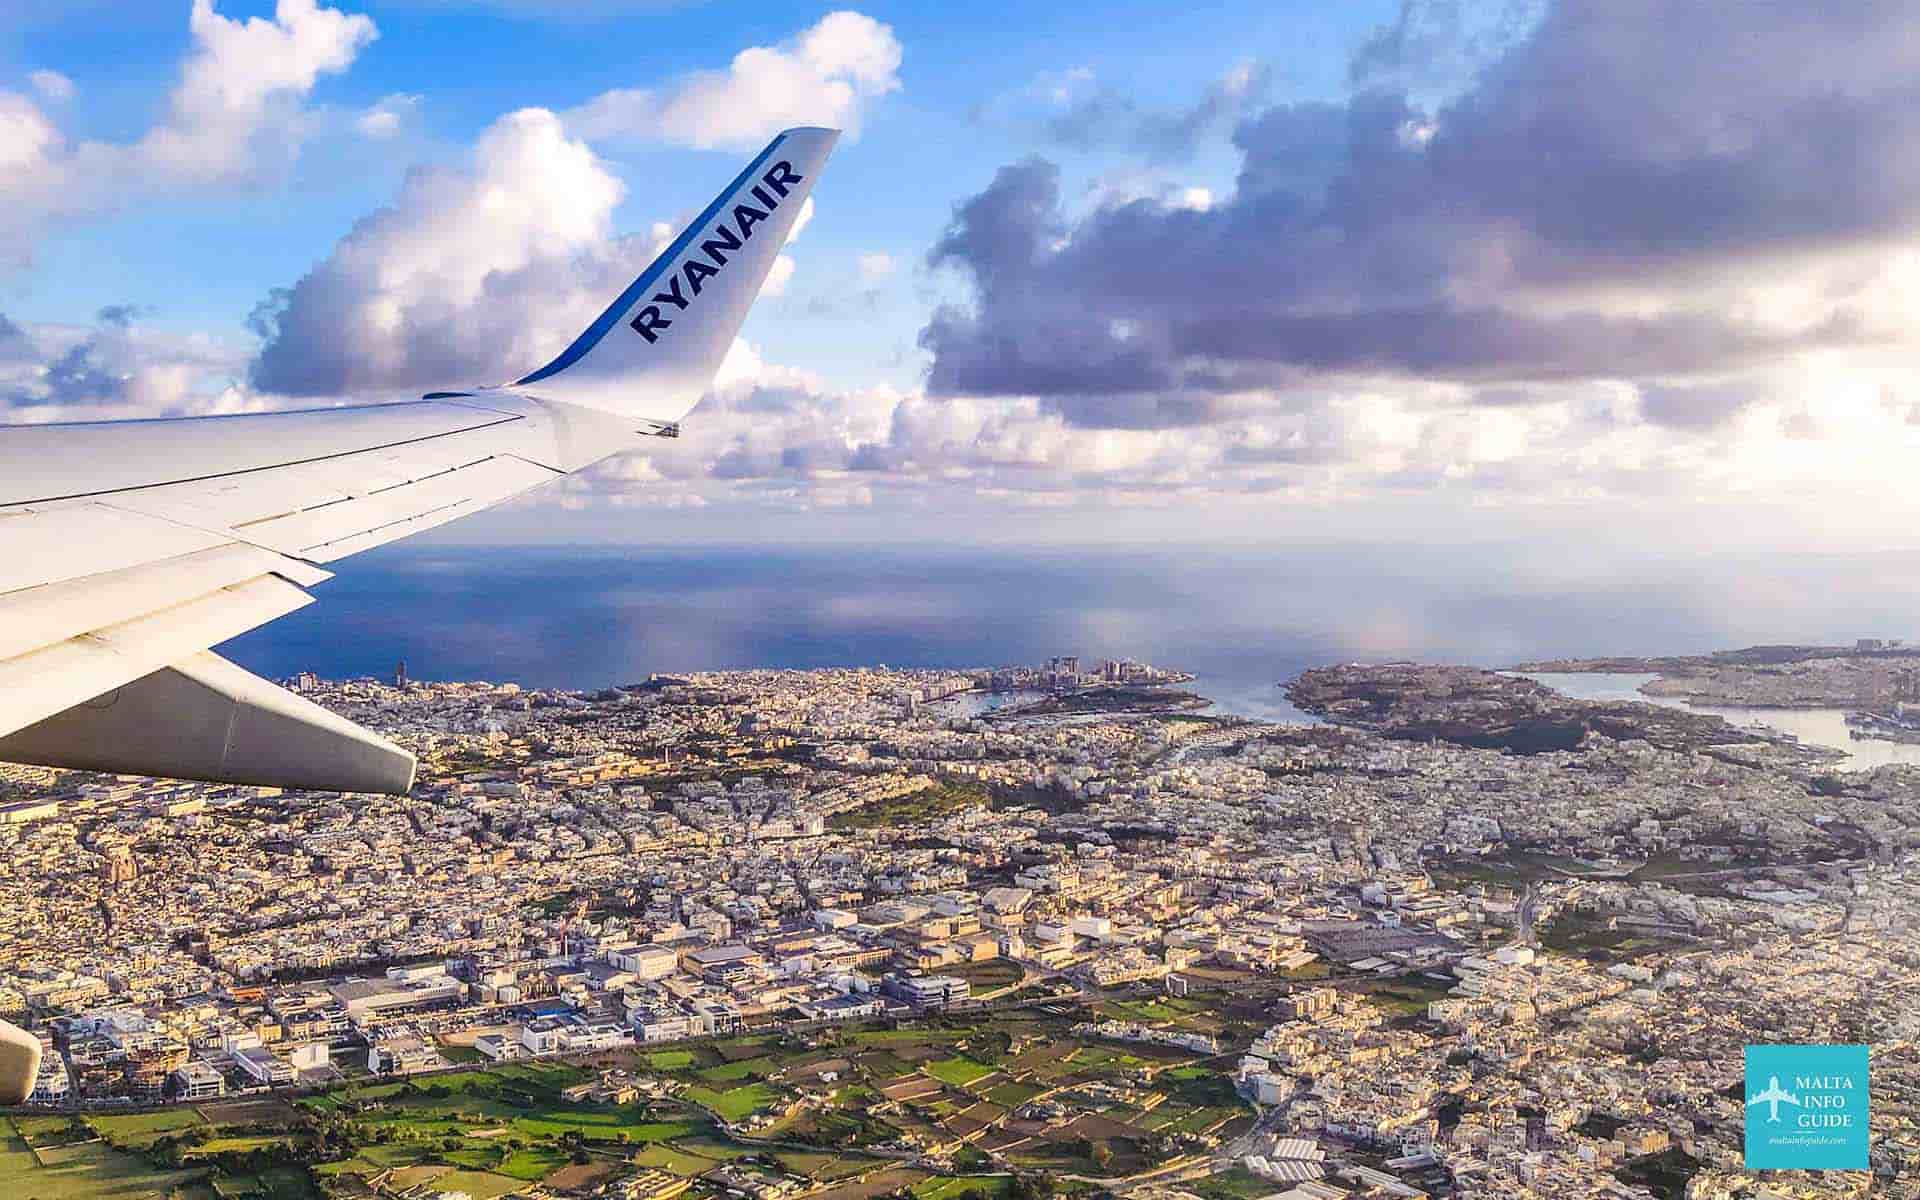 Flying over the Maltese islands with a view of the main areas like Sliema, Valletta and St. Julian's.